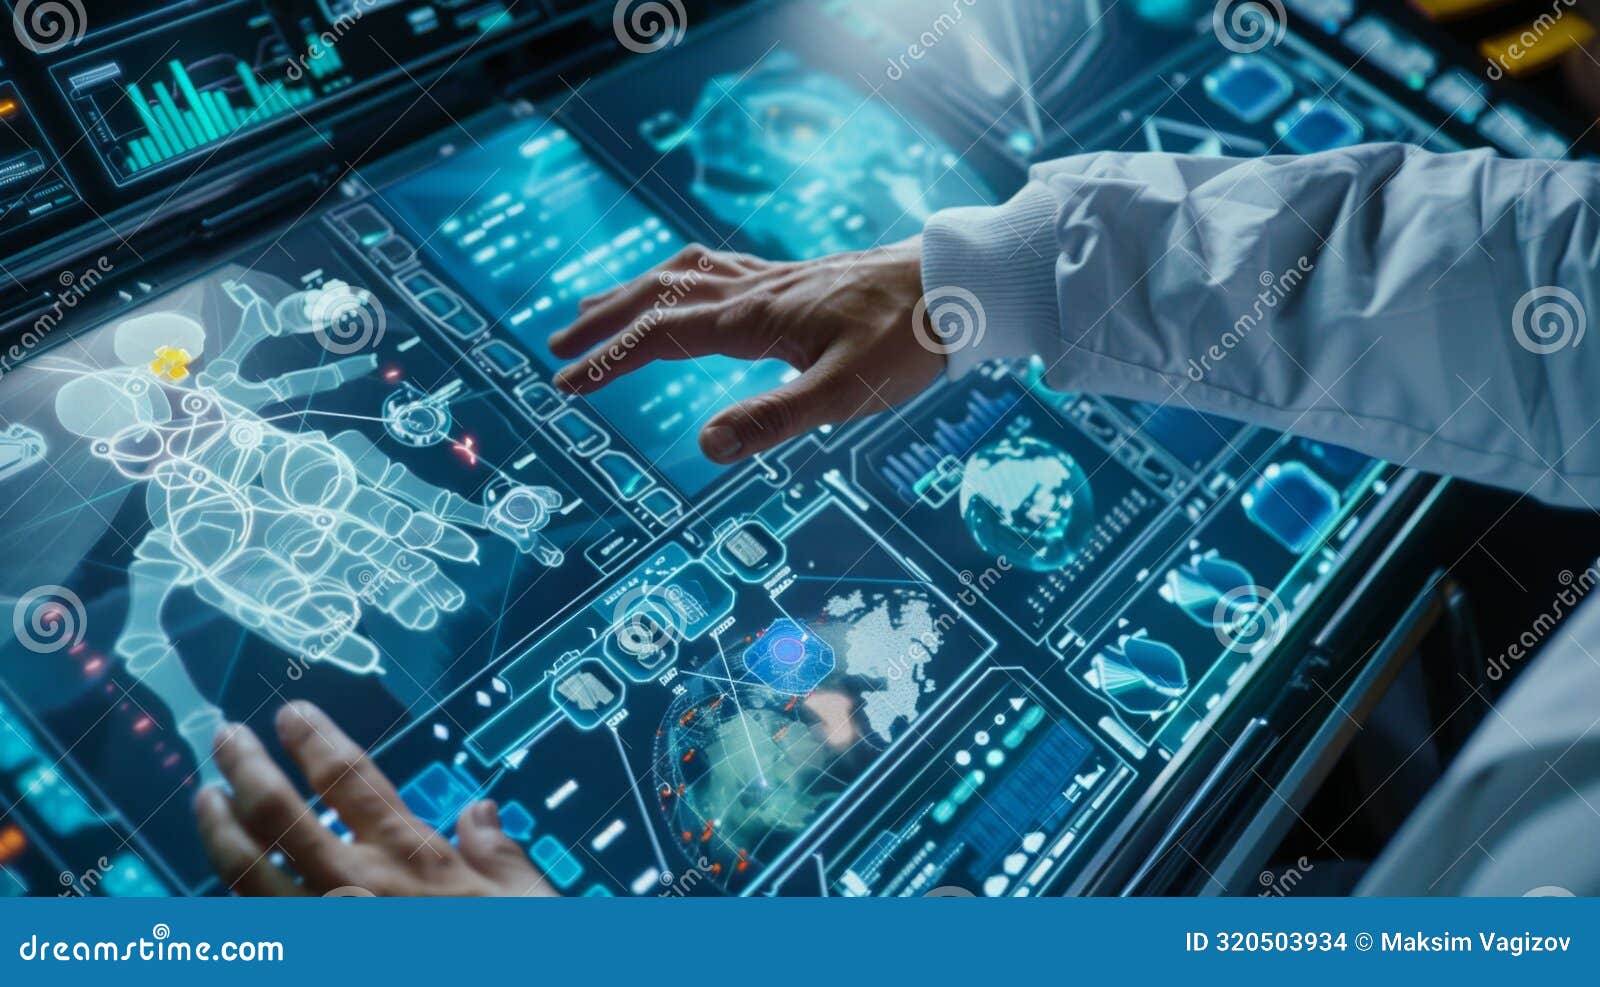 Futuristic Medical Technology Interface, Generative AI. High quality photo. A high-tech medical interface showing a holographic display with various health and data metrics, highlighting advancements in futuristic medical technology. AI generated